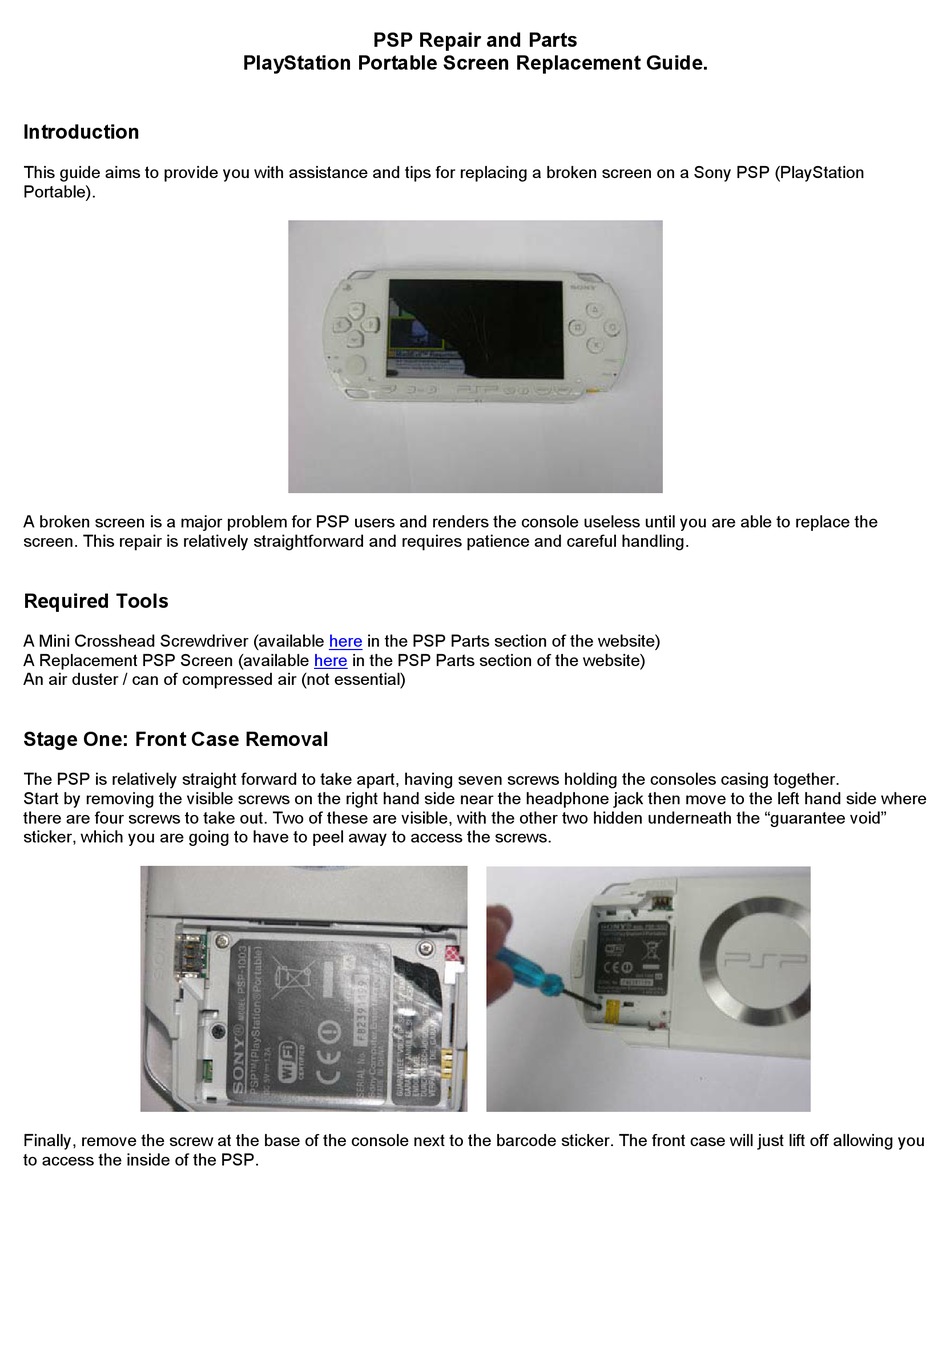 SONY PLAYSTATION PORTABLE REPAIR AND PARTS Pdf Download